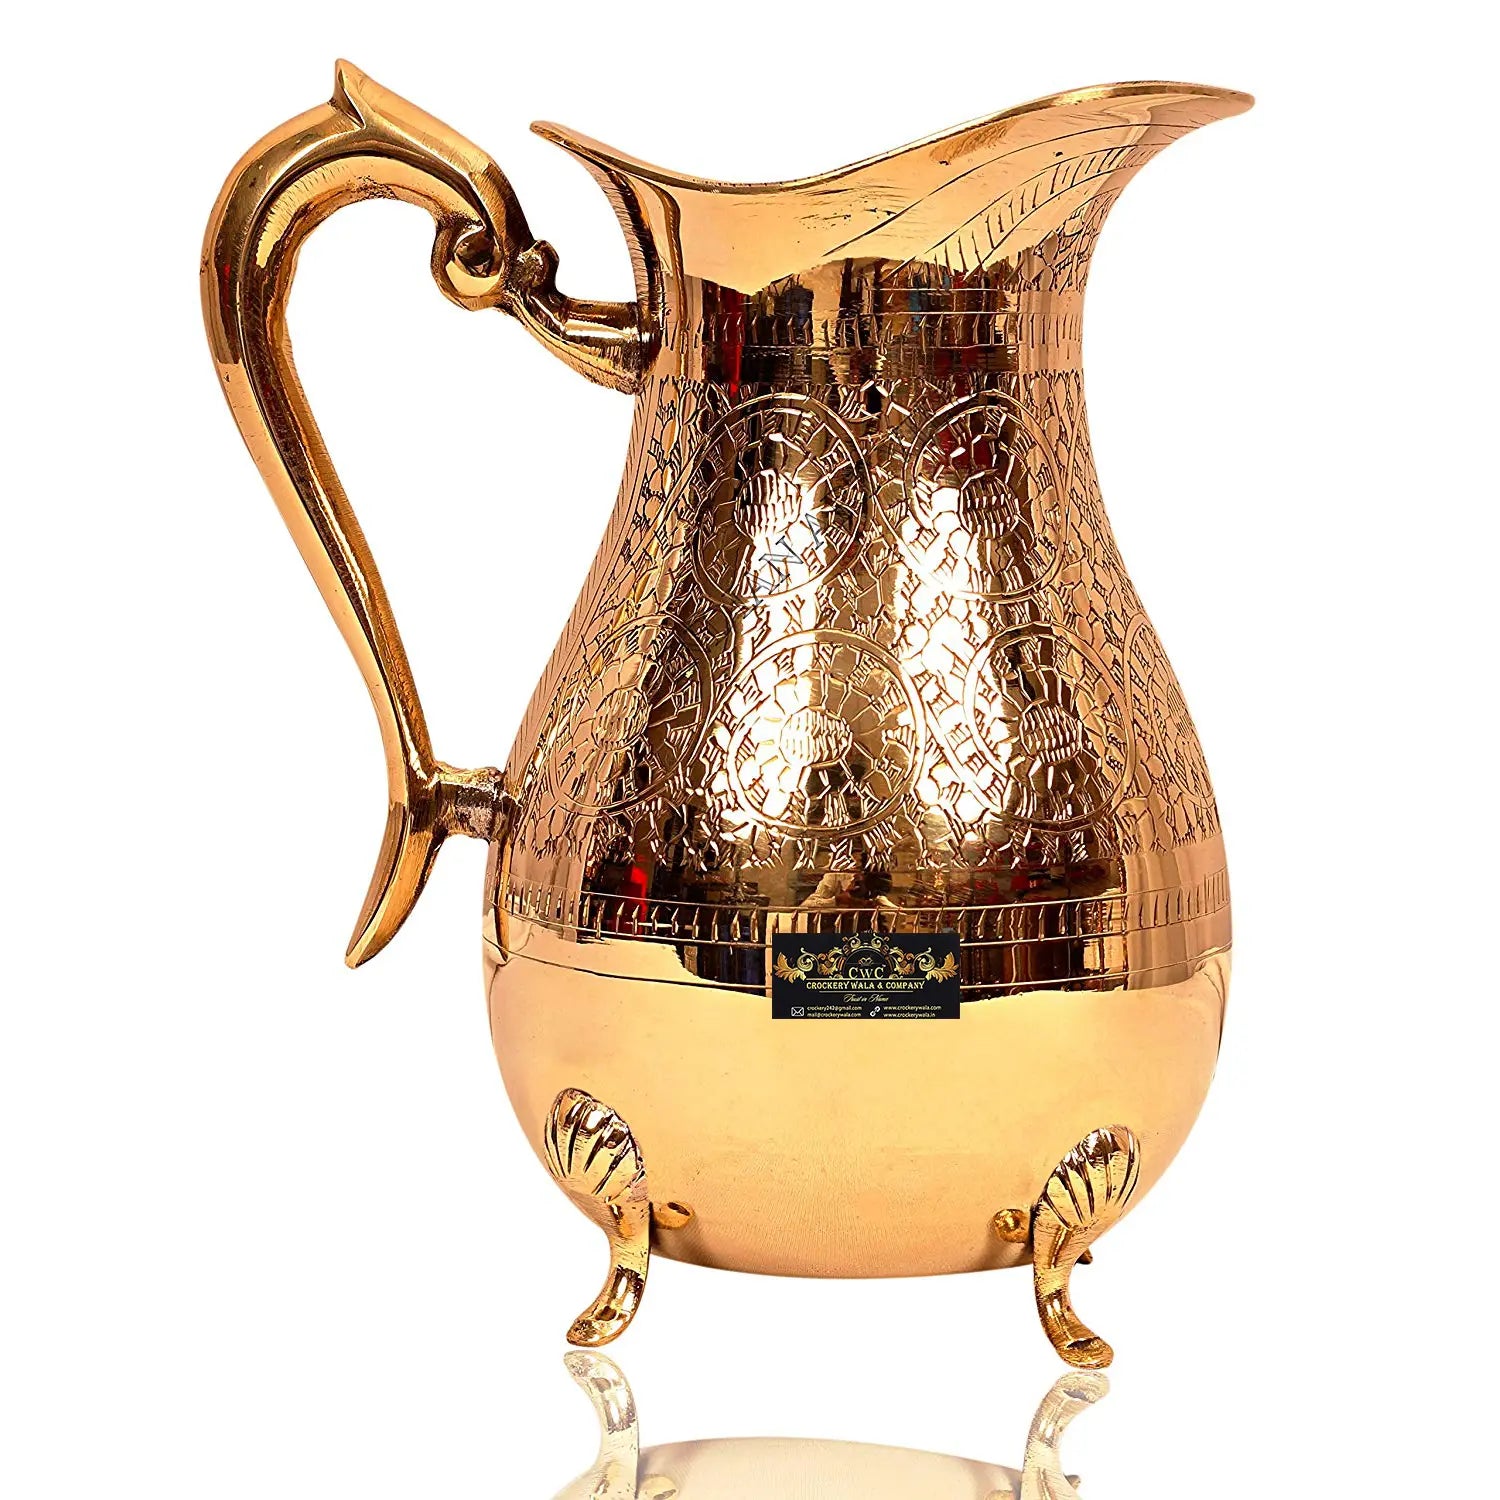 Pure Brass Handmade Jug Pitcher Jar with 4 Legs for Serving Drinking Water Home Decor - CROCKERY WALA AND COMPANY 